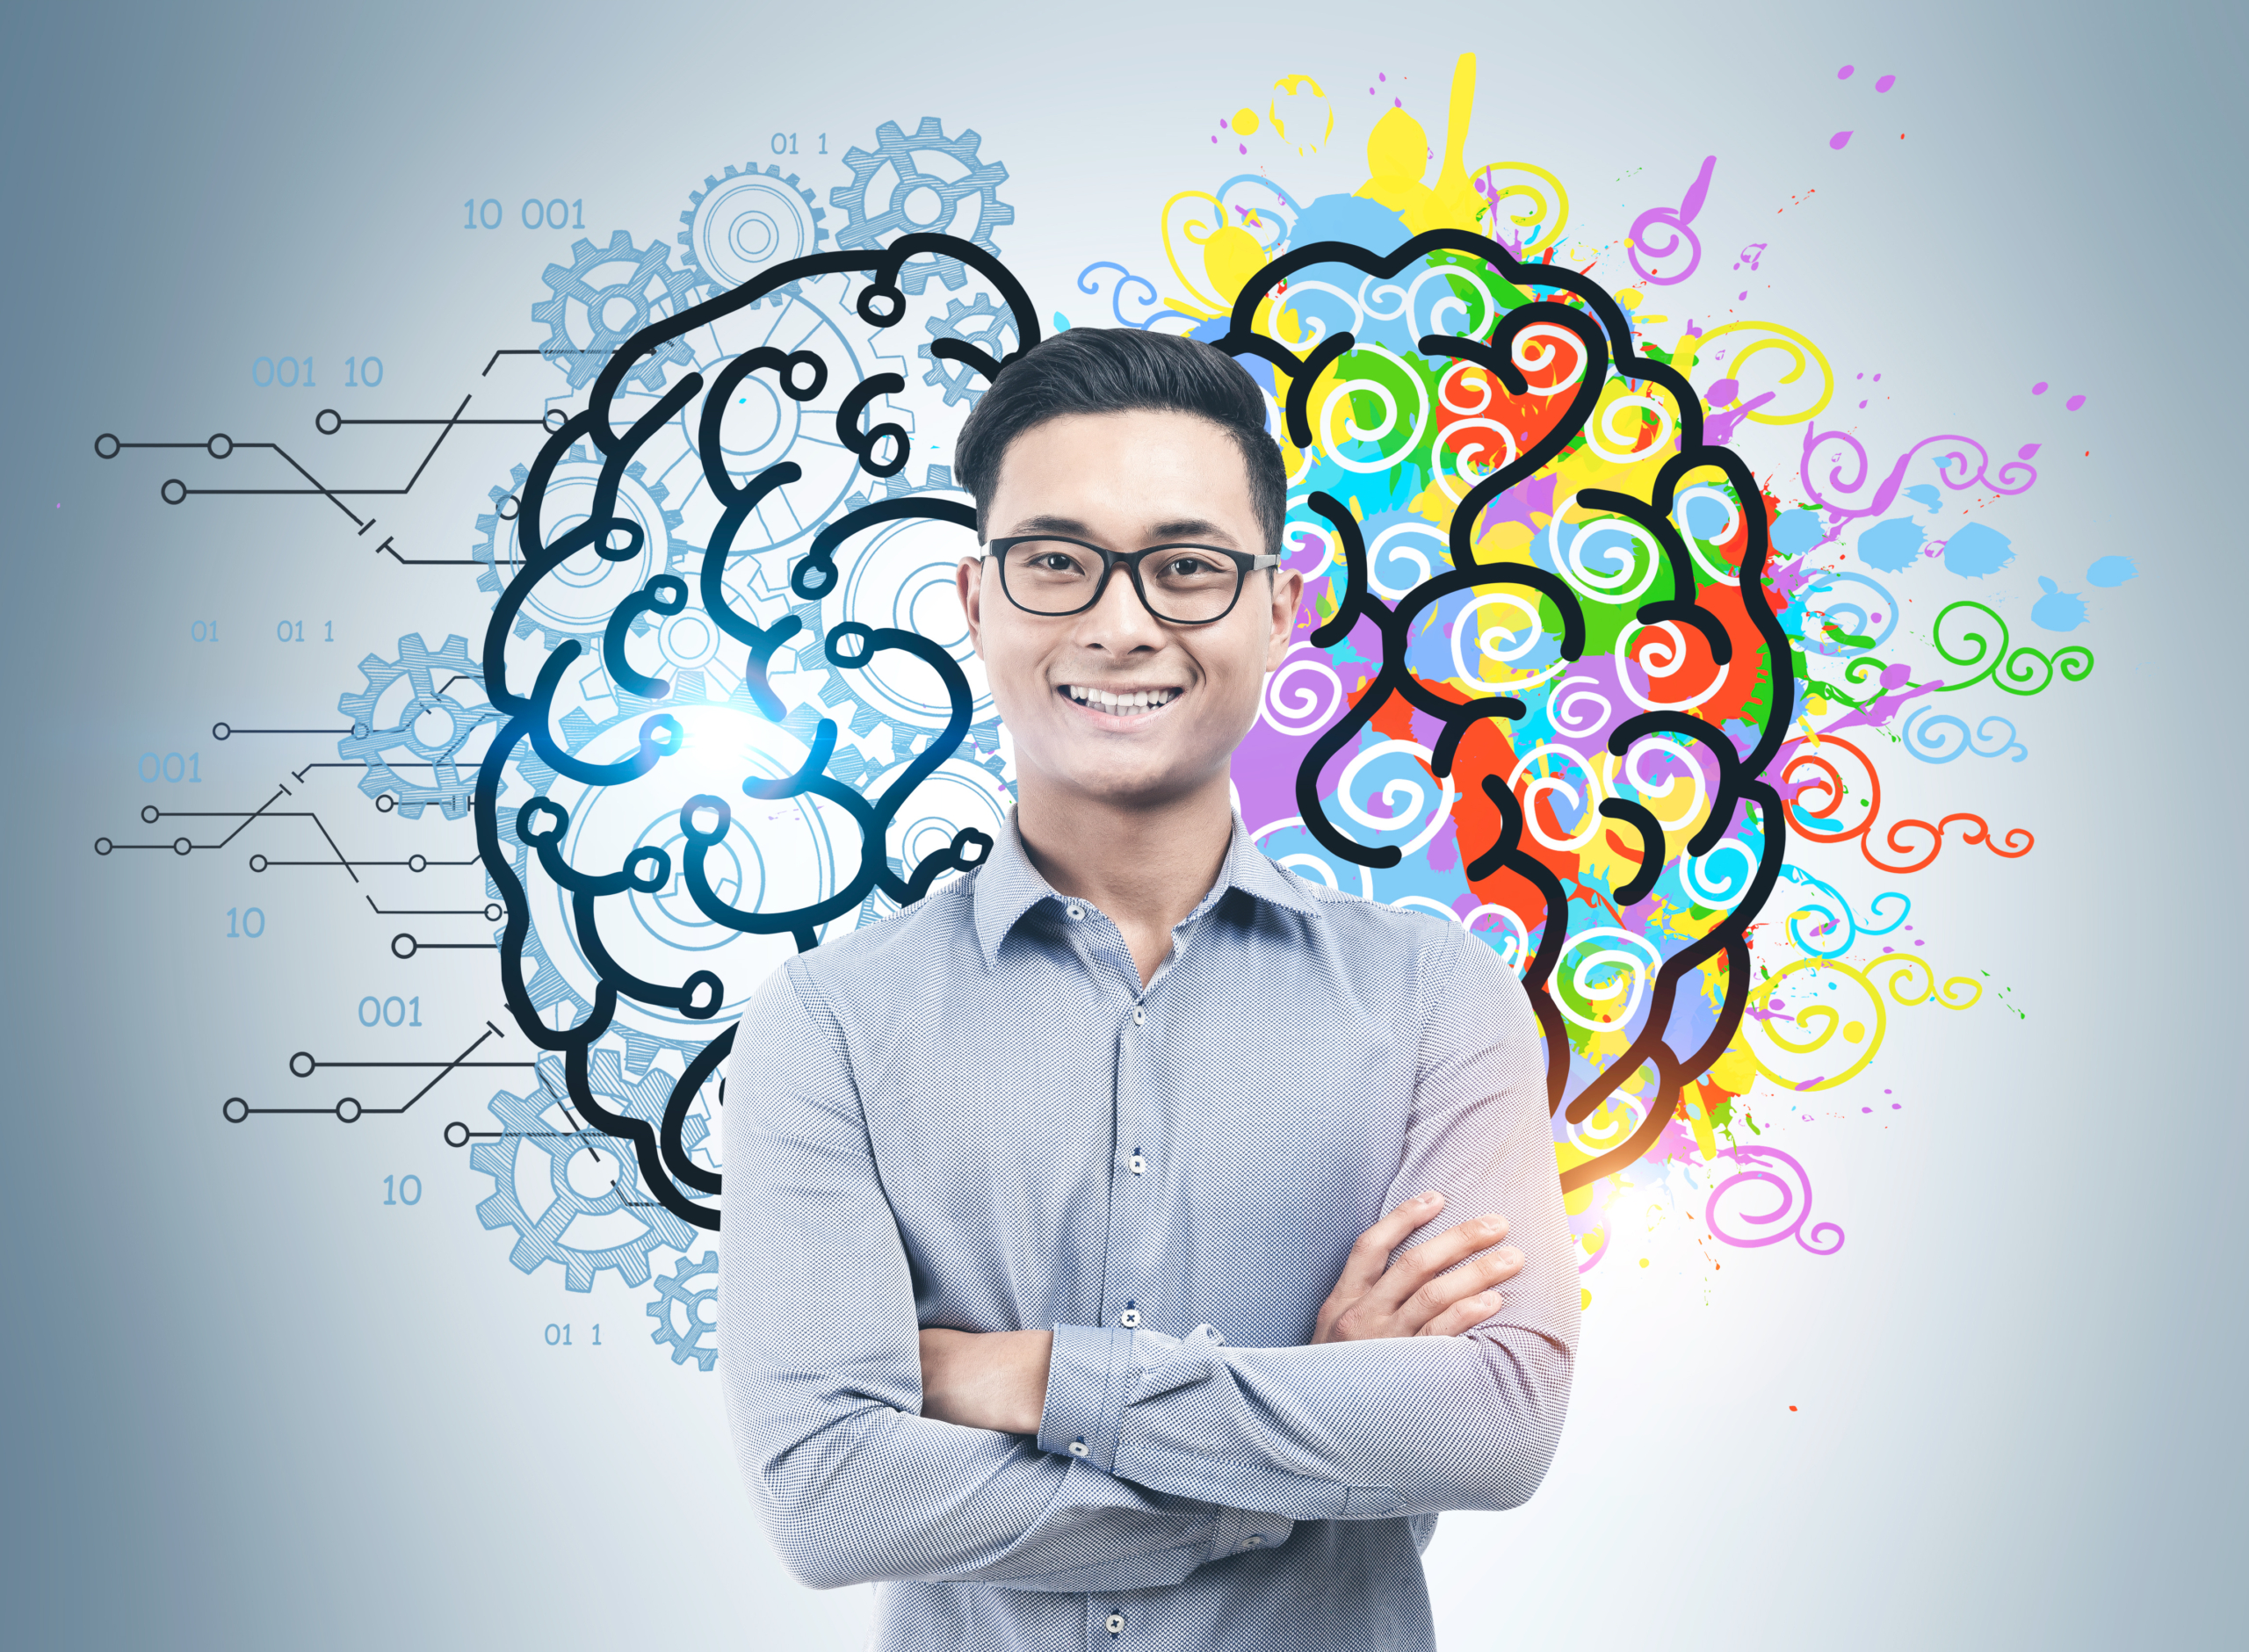 IQ vs EQ: Why Emotional Intelligence Matters More Than You Think